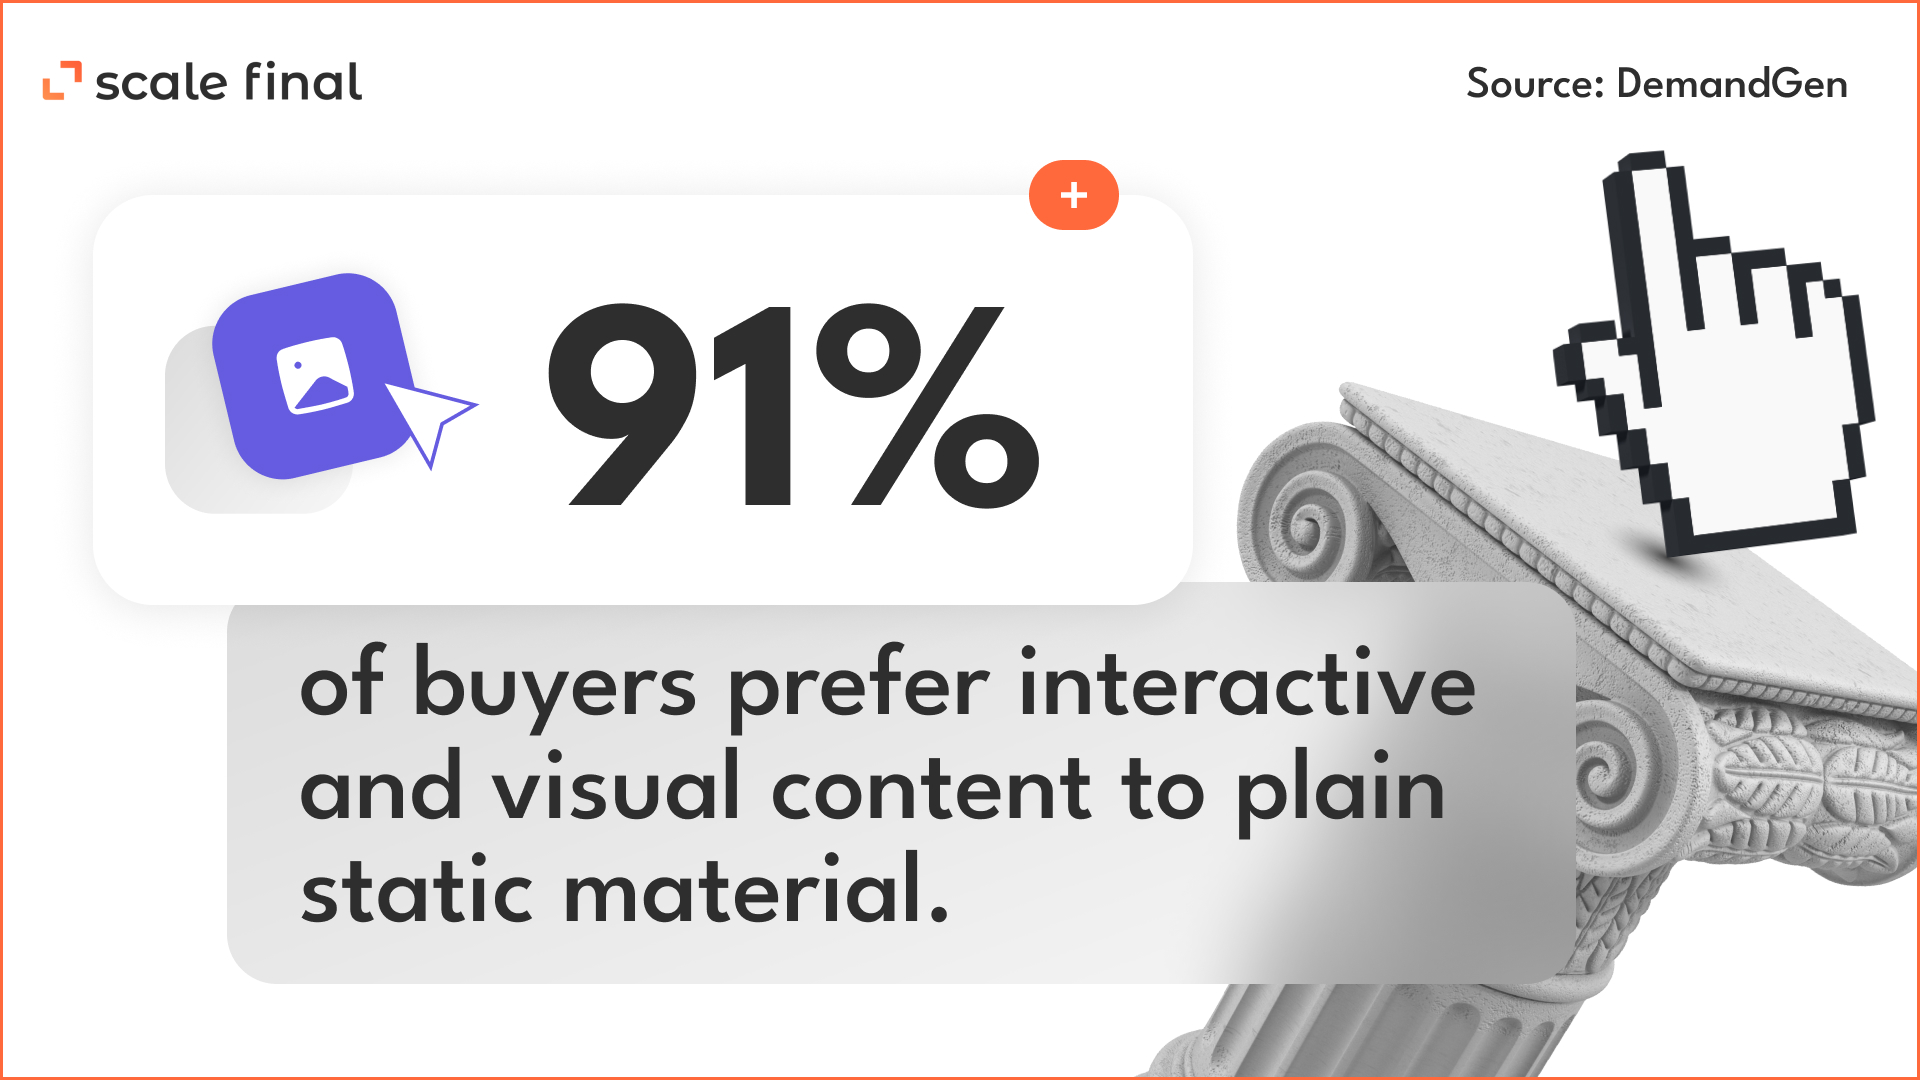 91% of buyers prefer interactive and visual content to plain static material. 
Source: DemandGen